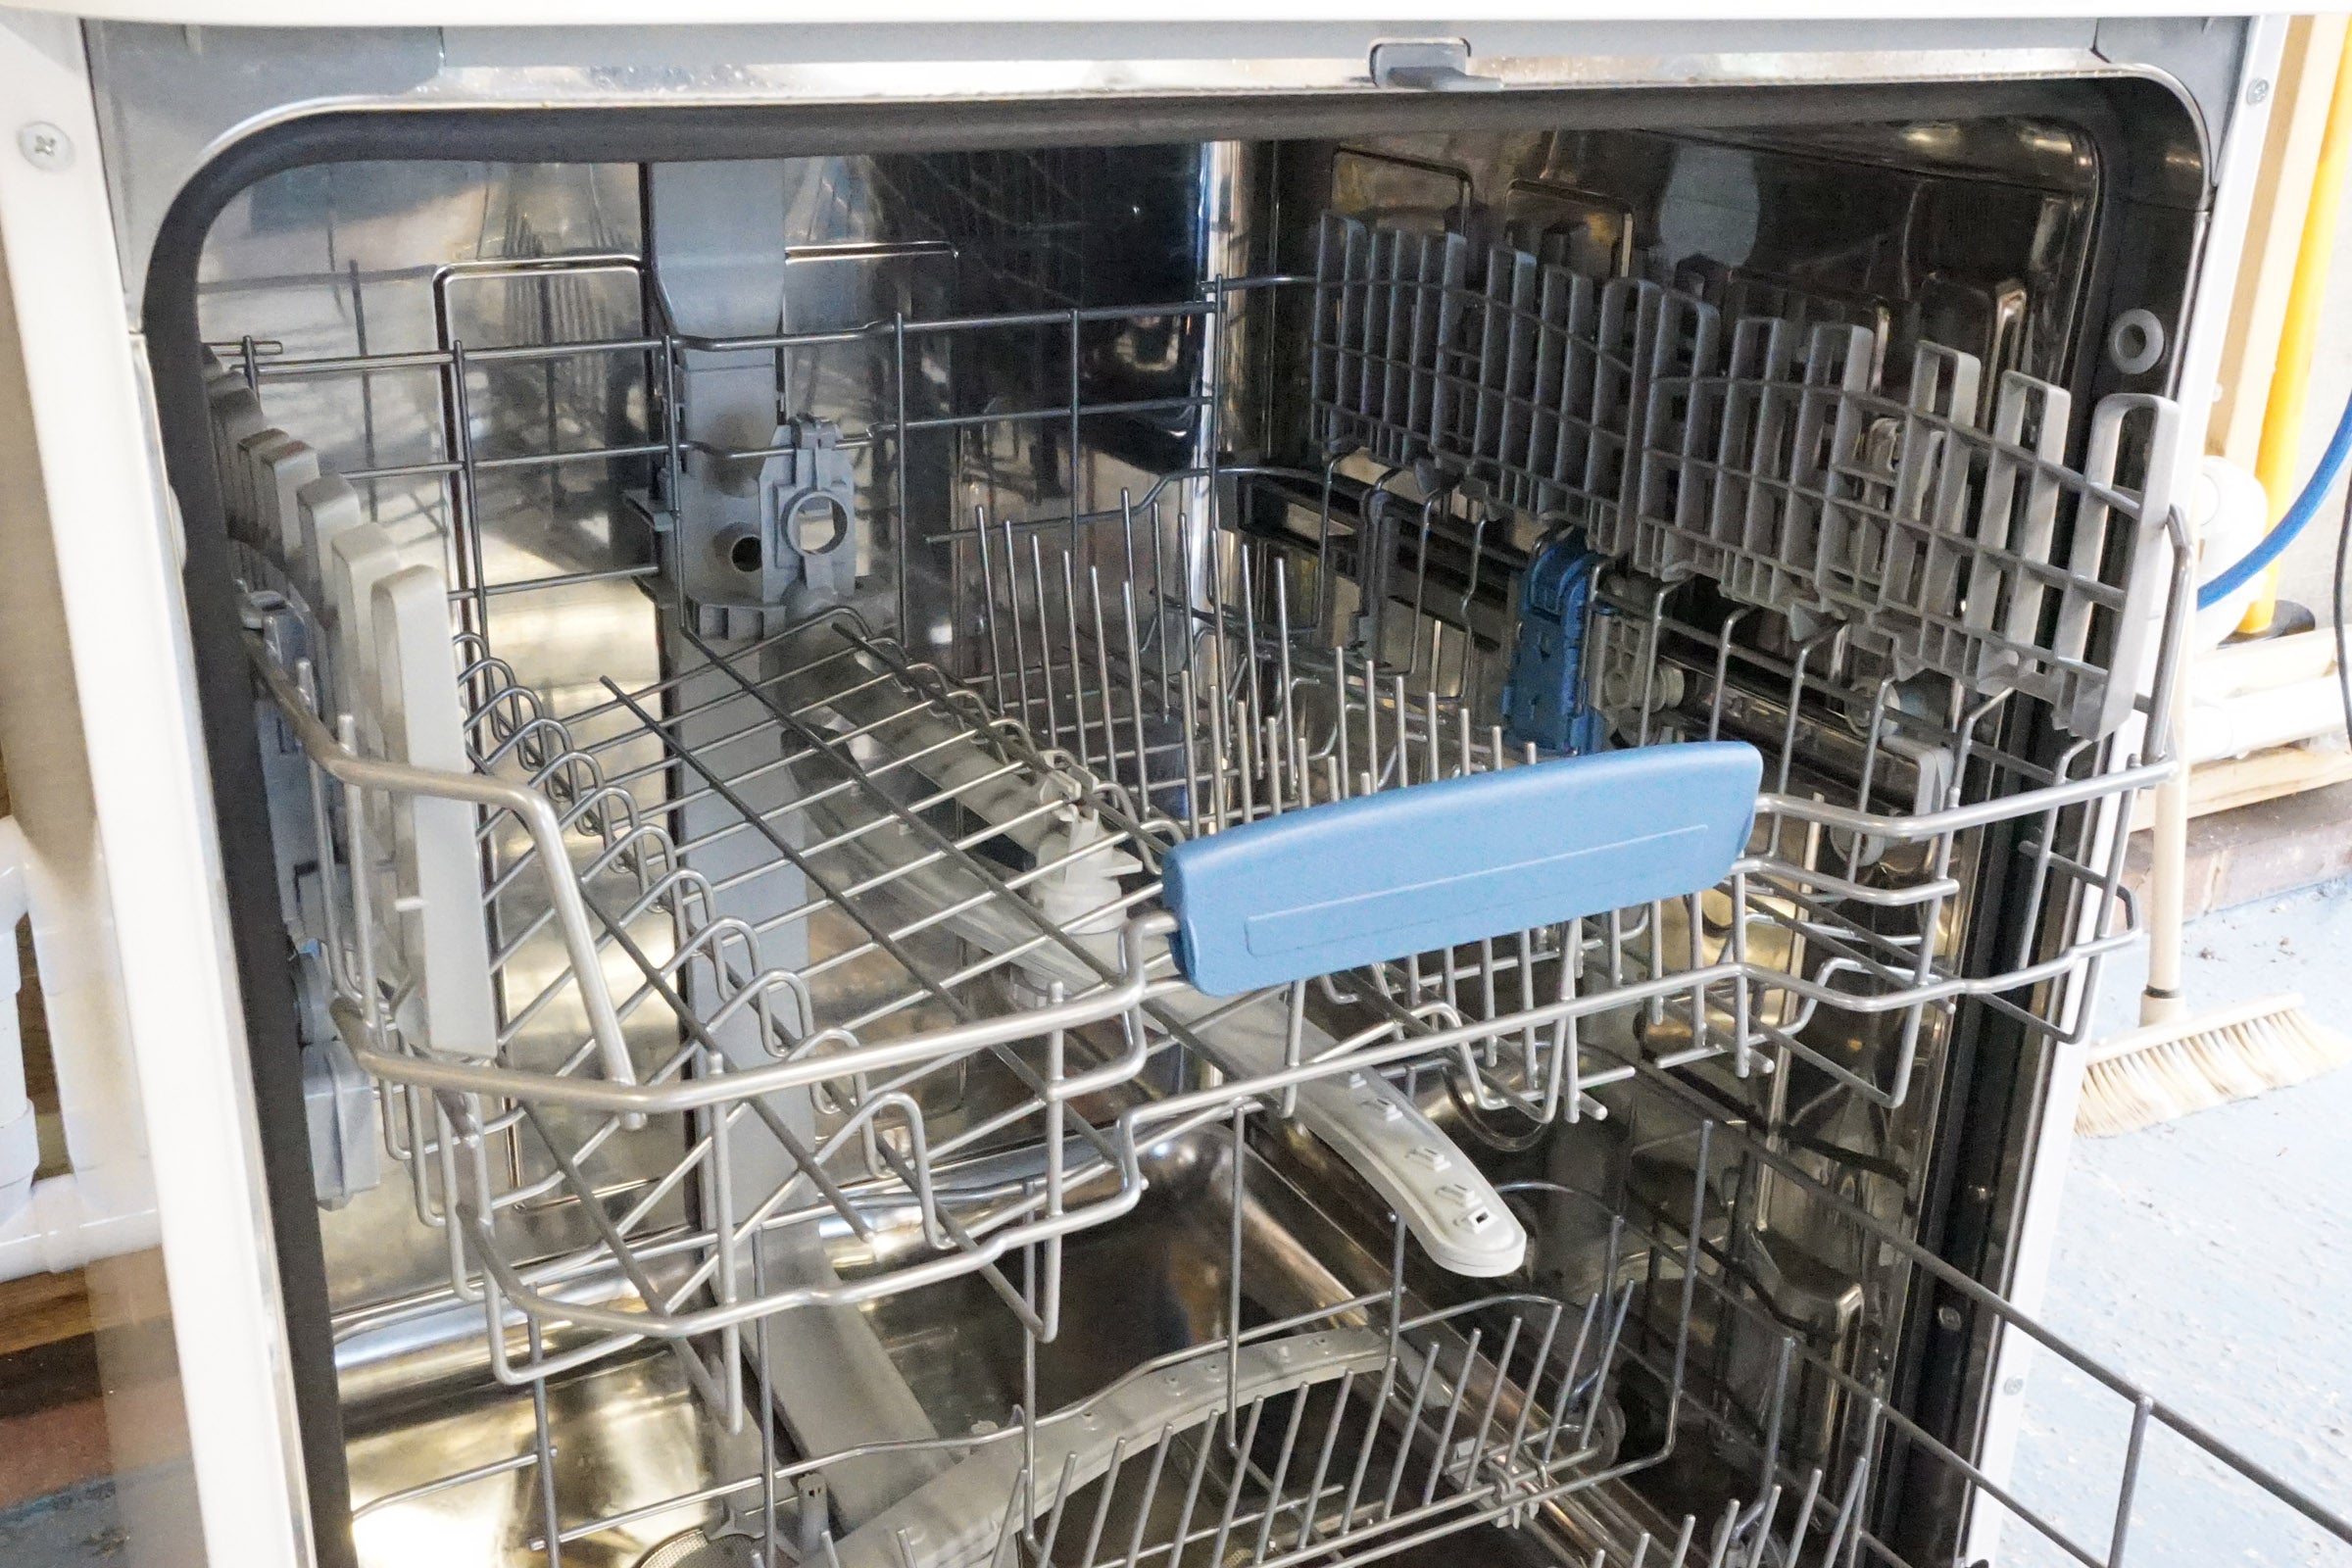 Interior view of an open Indesit dishwasher